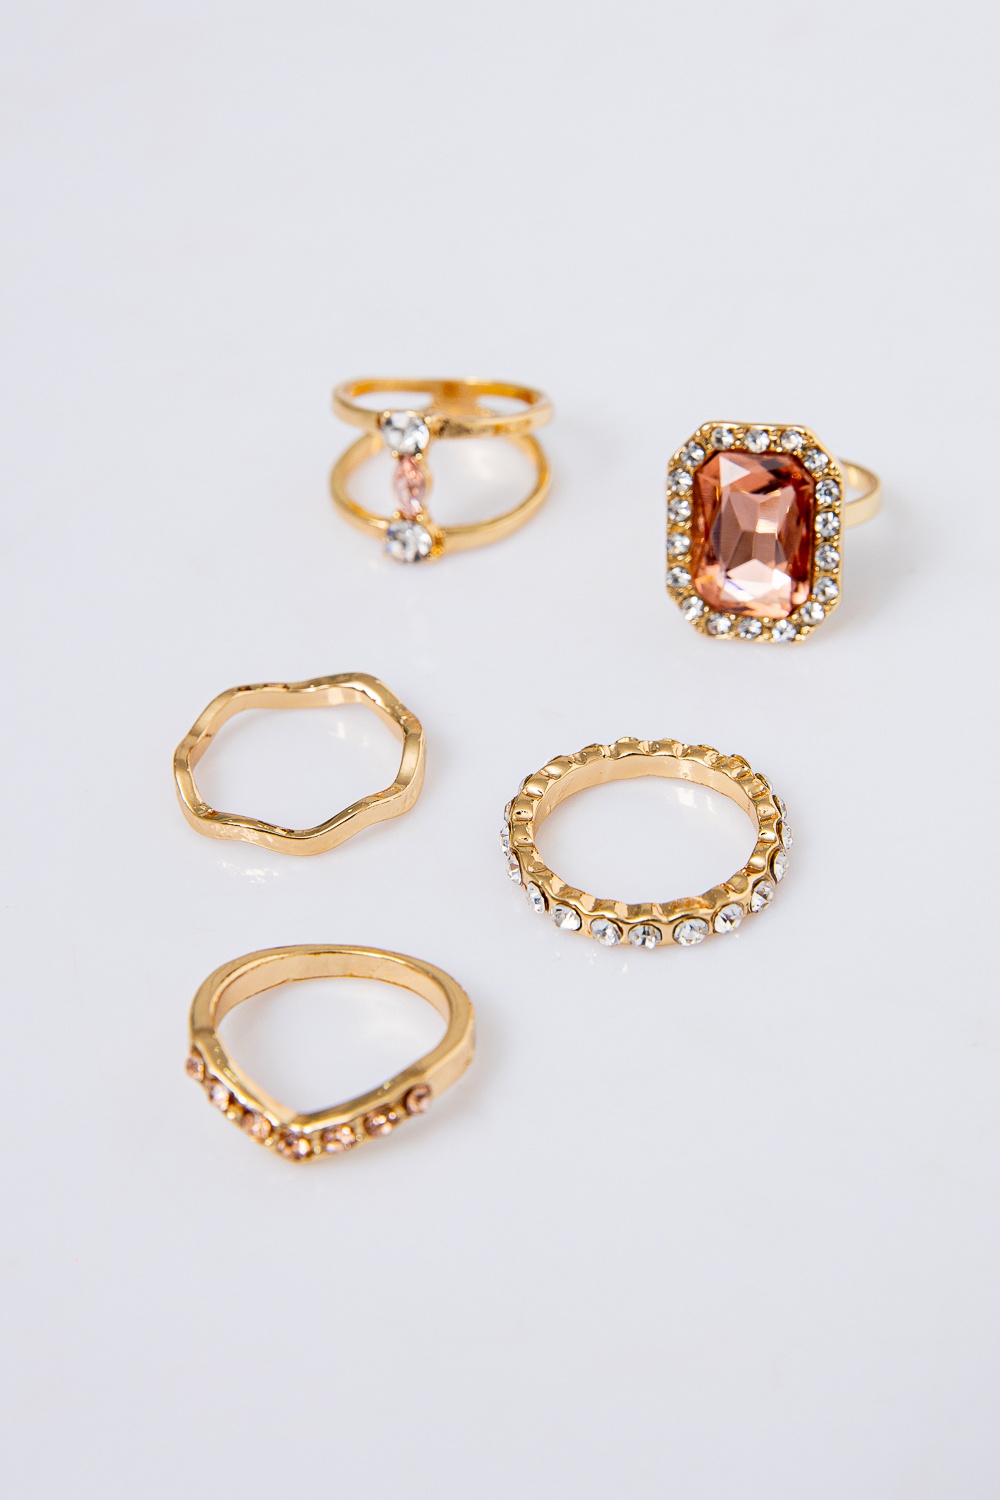 Backstage Pink Stone Gold Rings Set